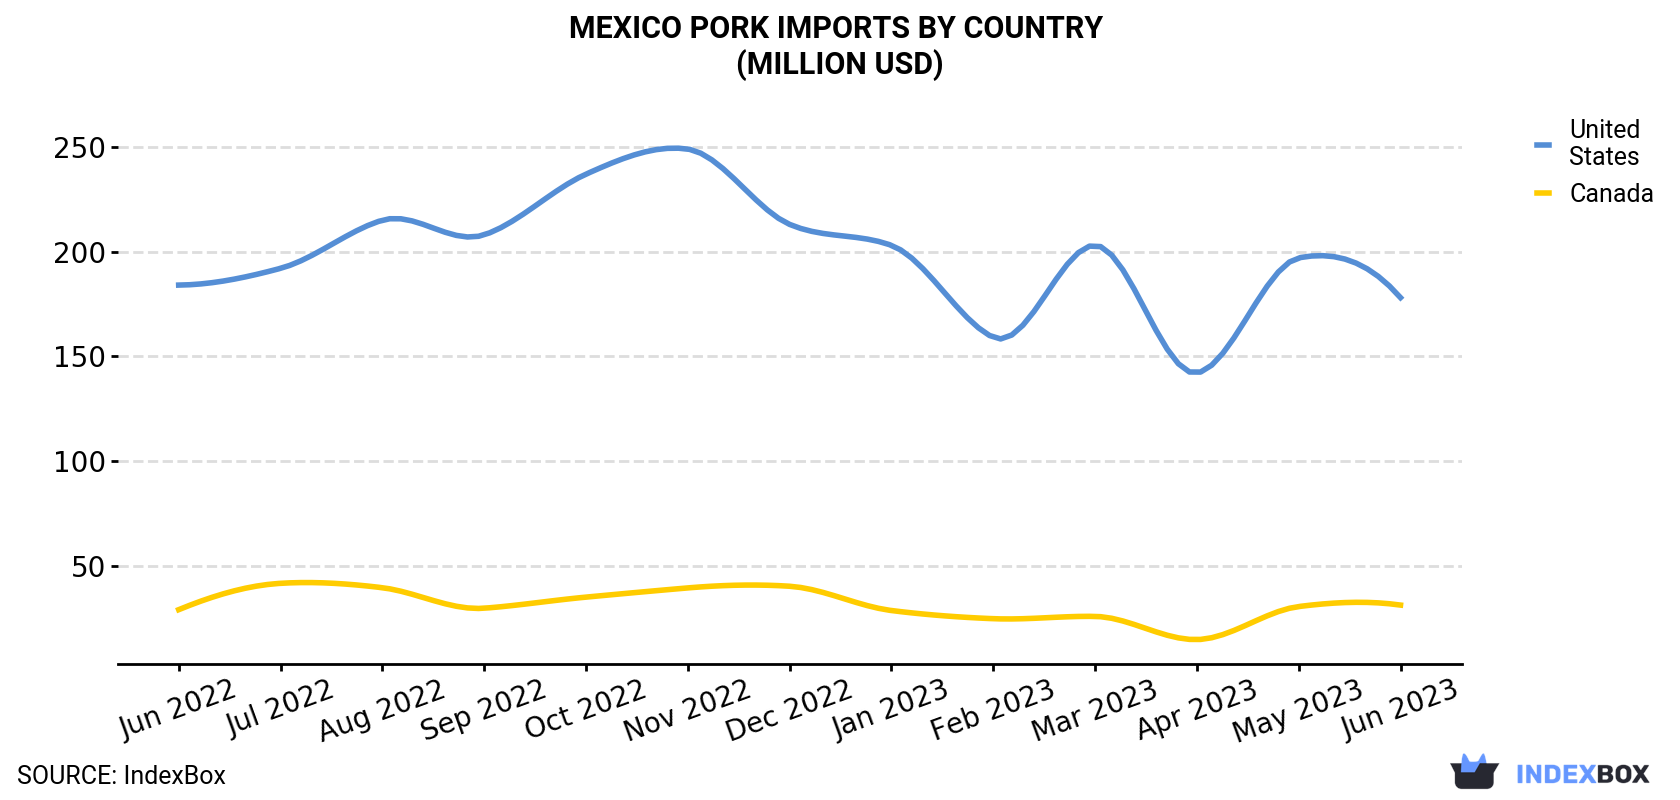 Mexico Pork Imports By Country (Million USD)